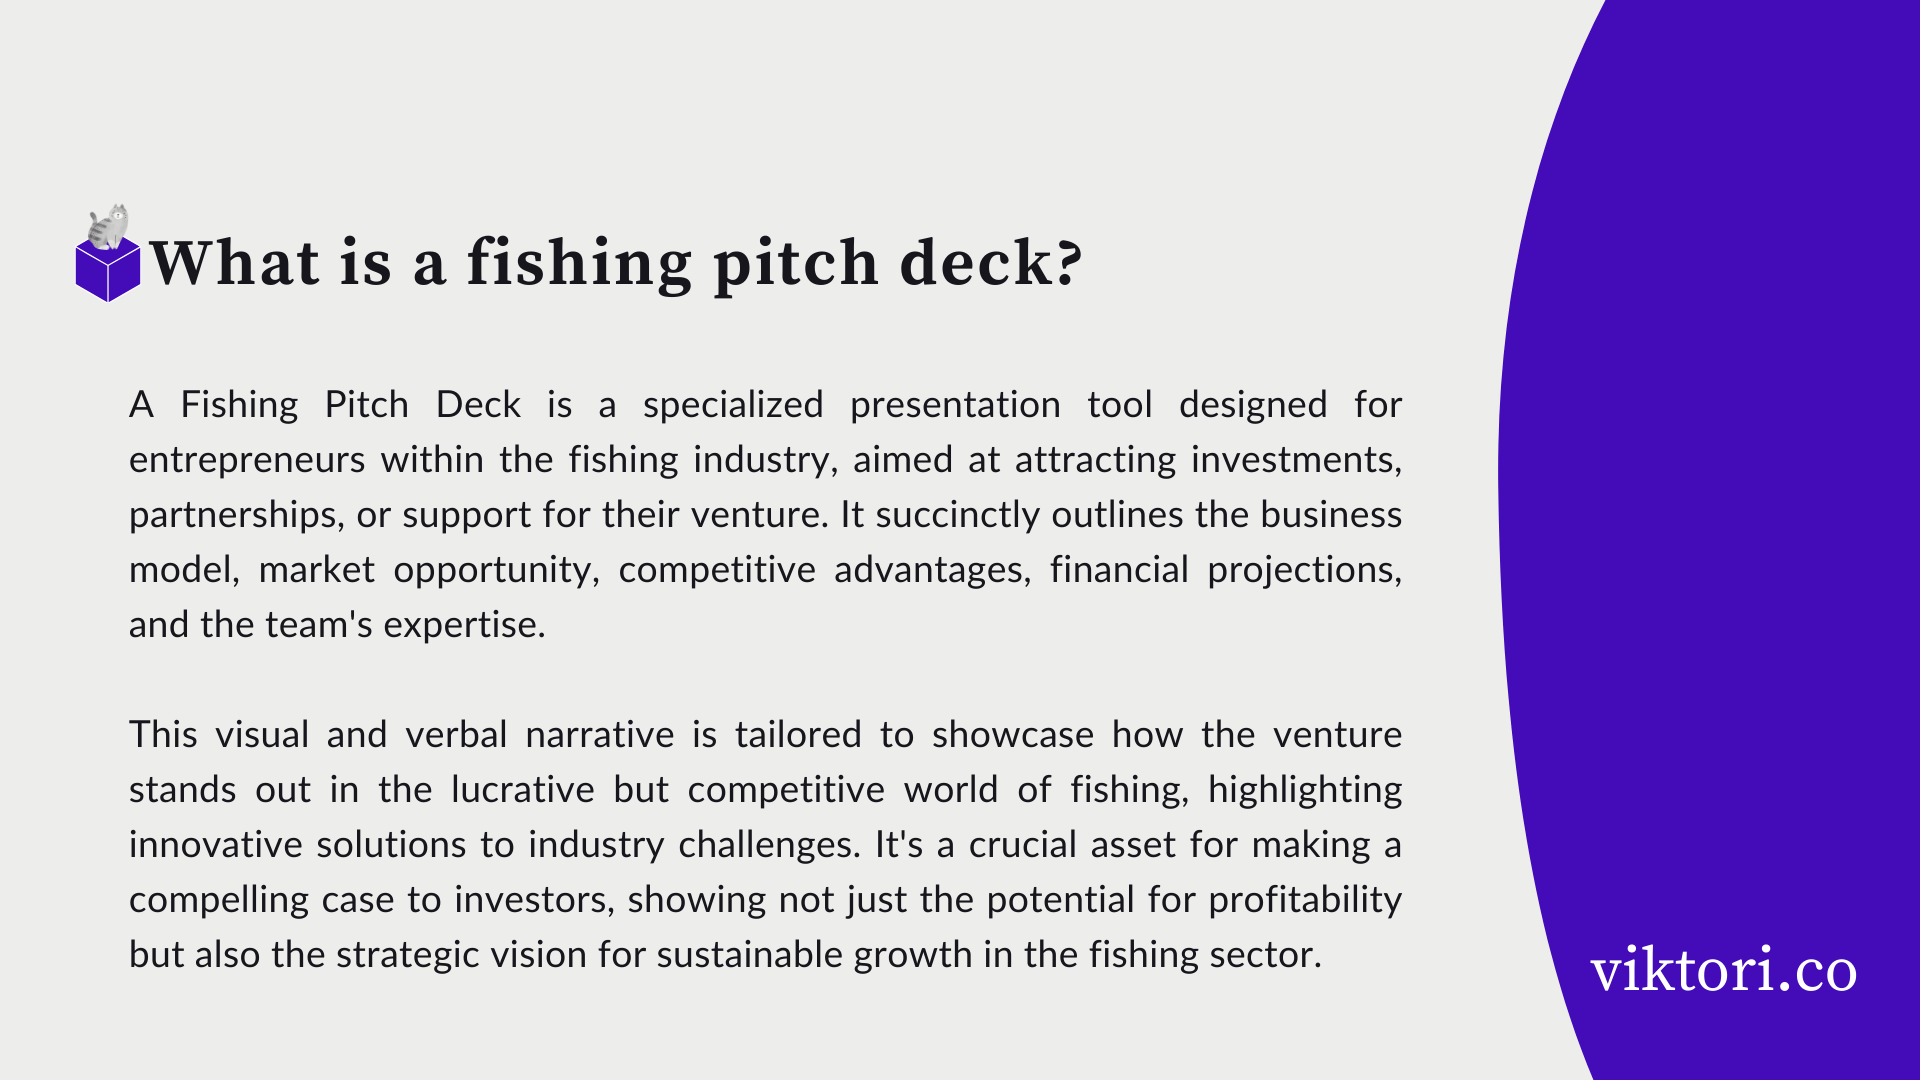 Fishing Pitch Deck Definition